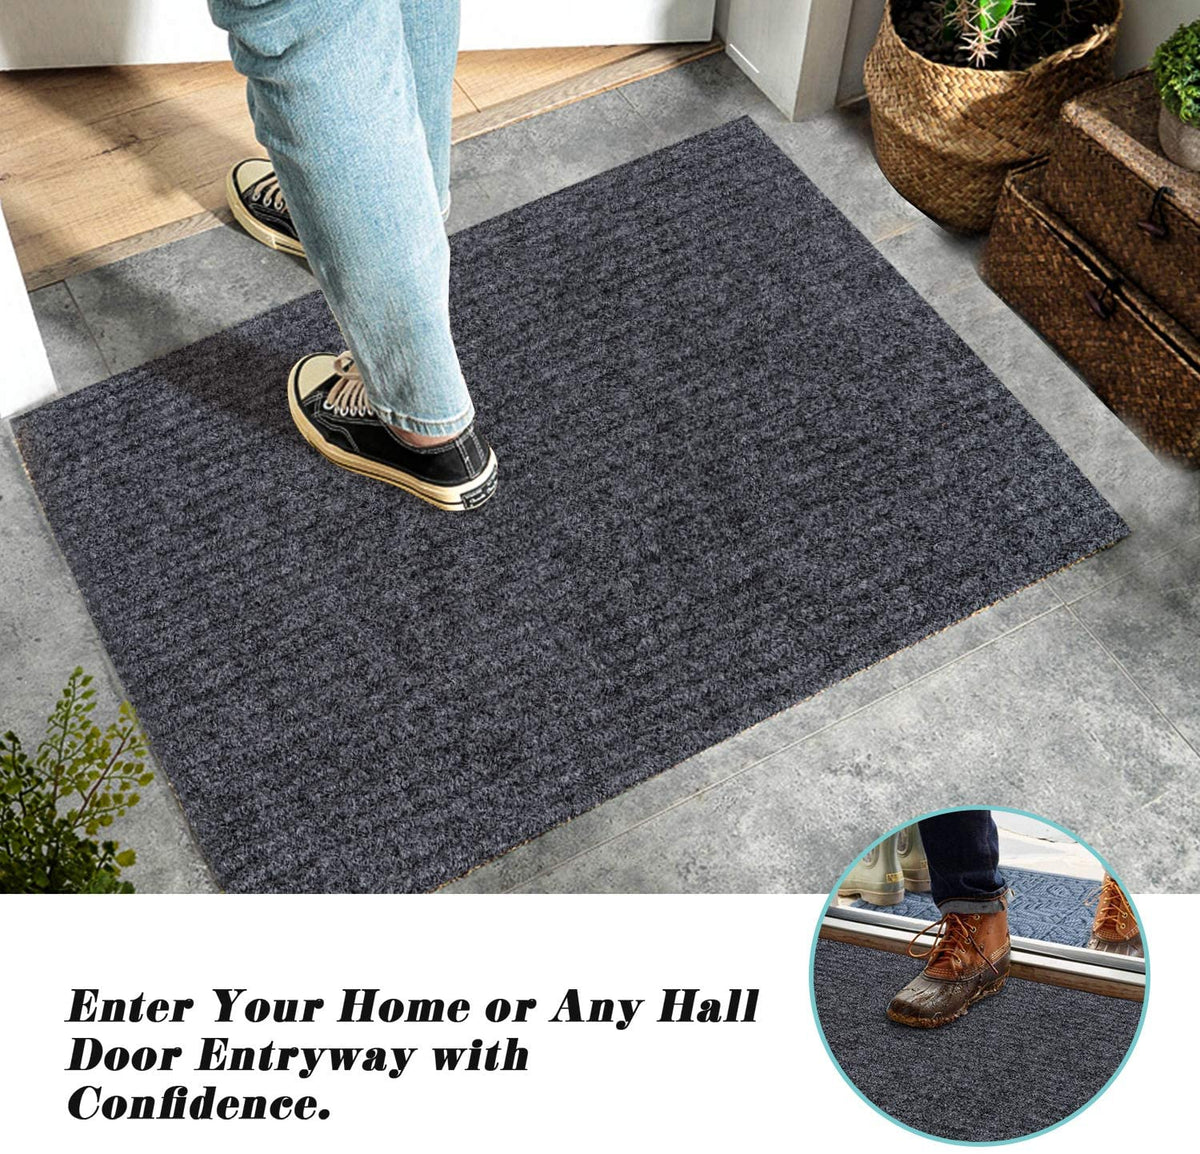 Set of 2 Ribbed Indoor/Outdoor Door Mat (17 x 30)-Great for Mud-Rooms,  High Traffic Areas, Garages, Doorways, and Everyday Home Use - Gray Black